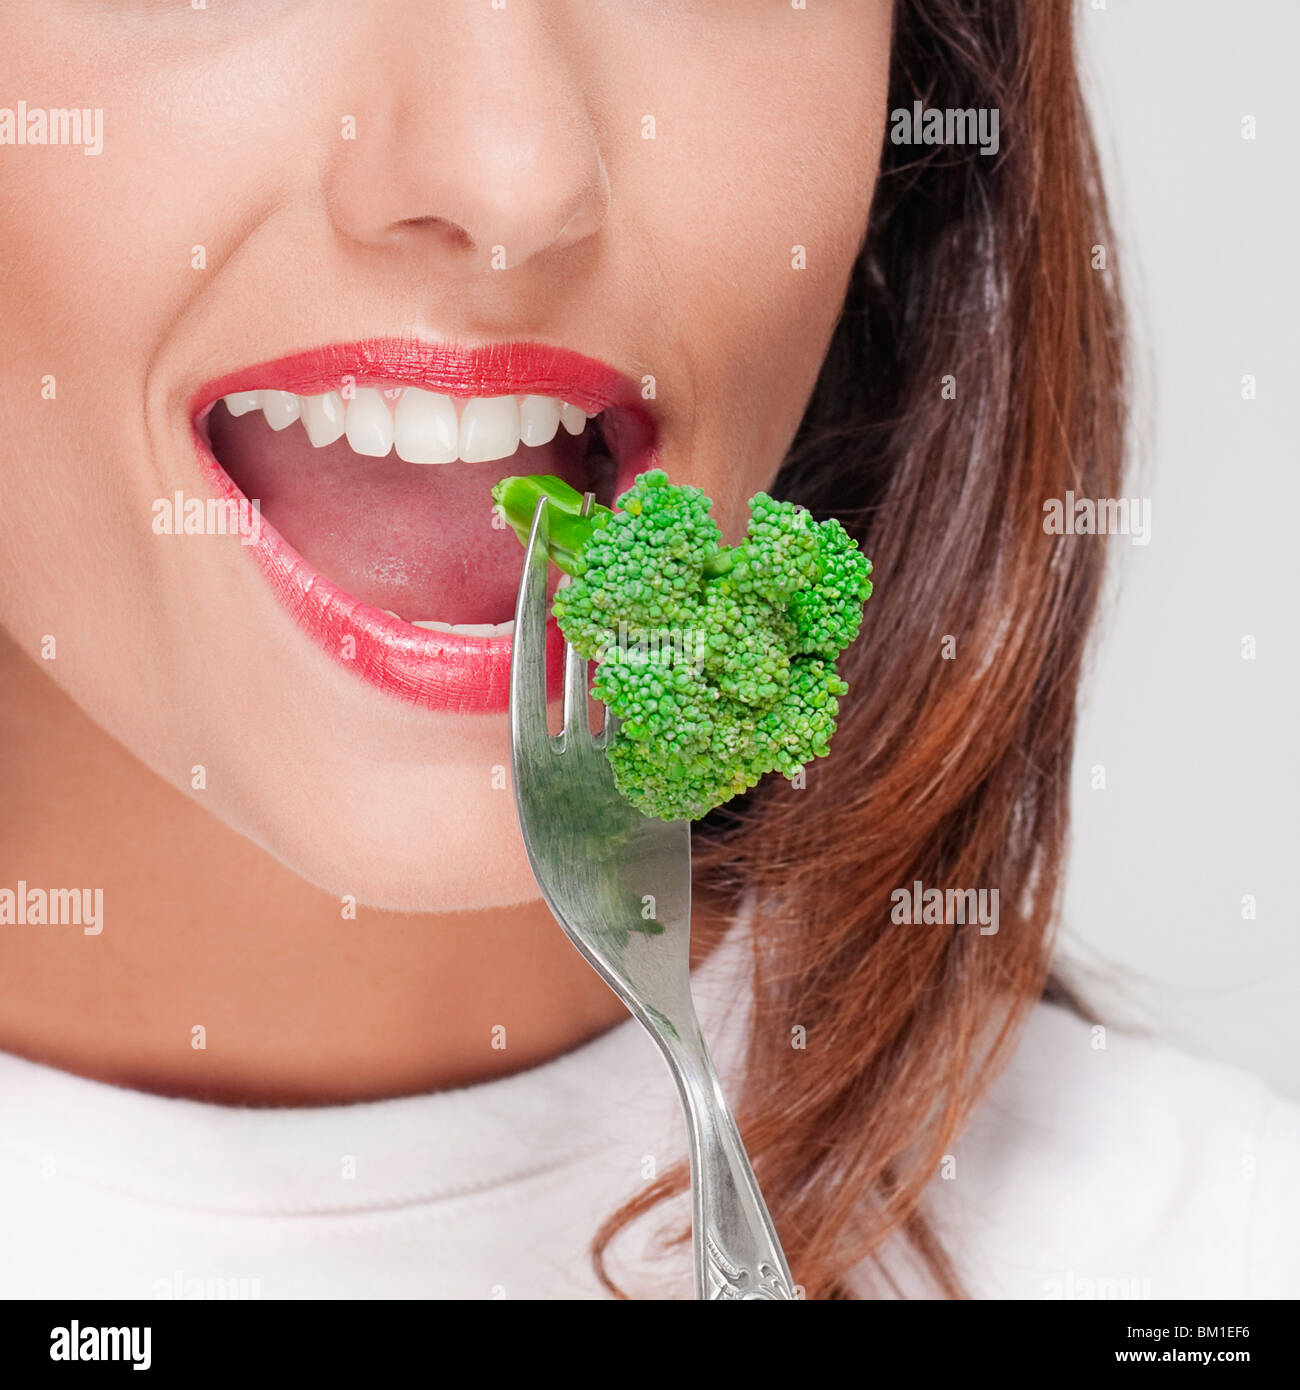 Close-up of a woman eating broccoli Stock Photo